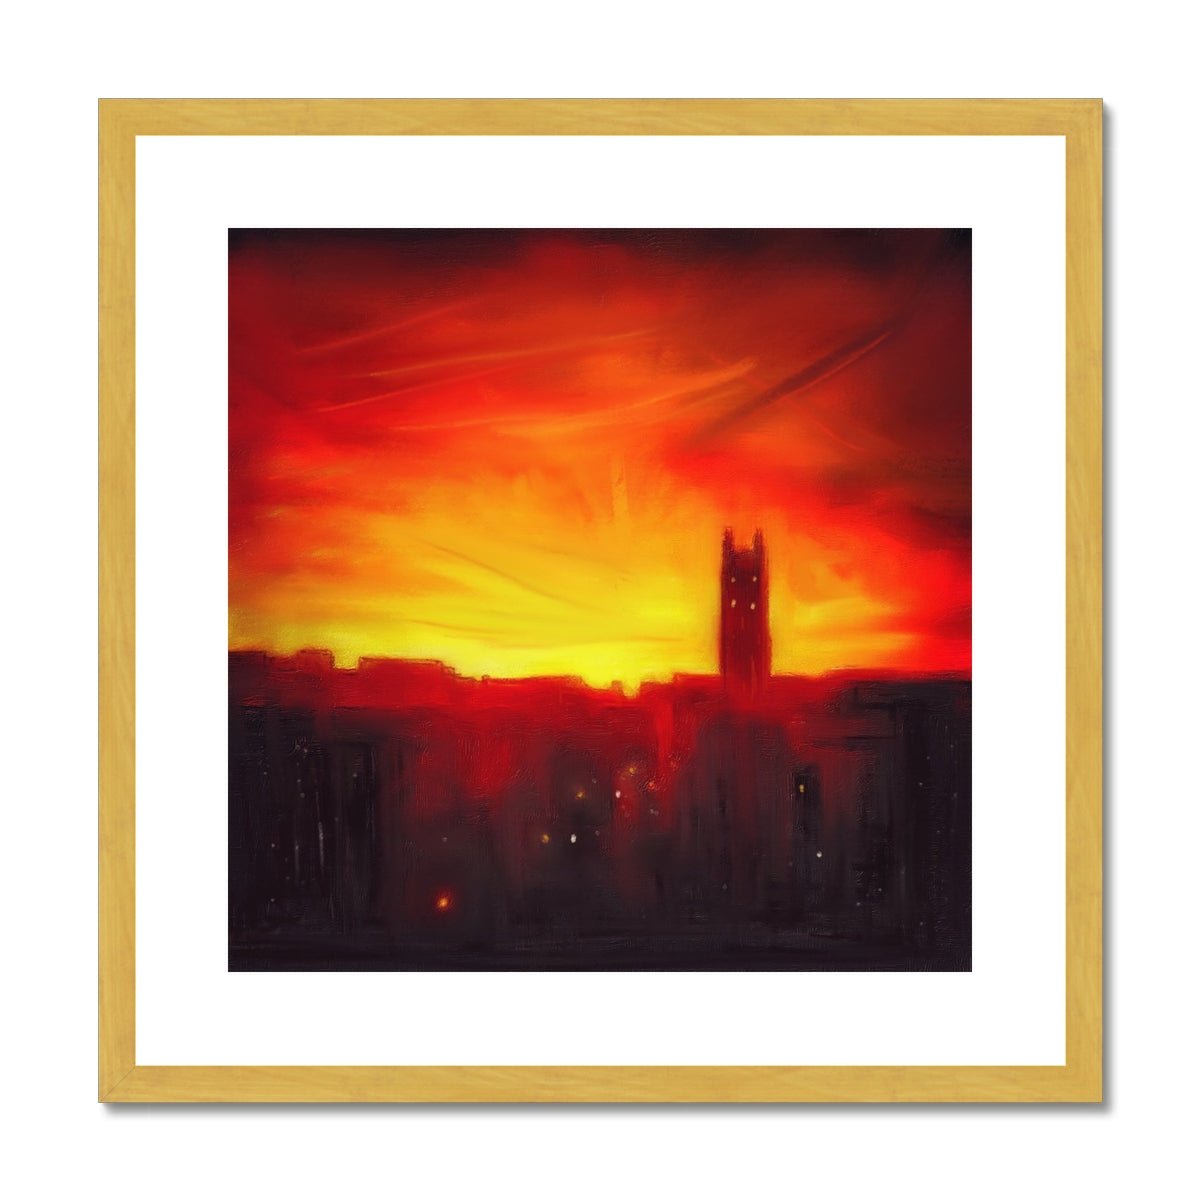 St Stephen's Church Sunset Painting | Antique Framed & Mounted Prints From Scotland-Antique Framed & Mounted Prints-Edinburgh & Glasgow Art Gallery-20"x20"-Gold Frame-Paintings, Prints, Homeware, Art Gifts From Scotland By Scottish Artist Kevin Hunter